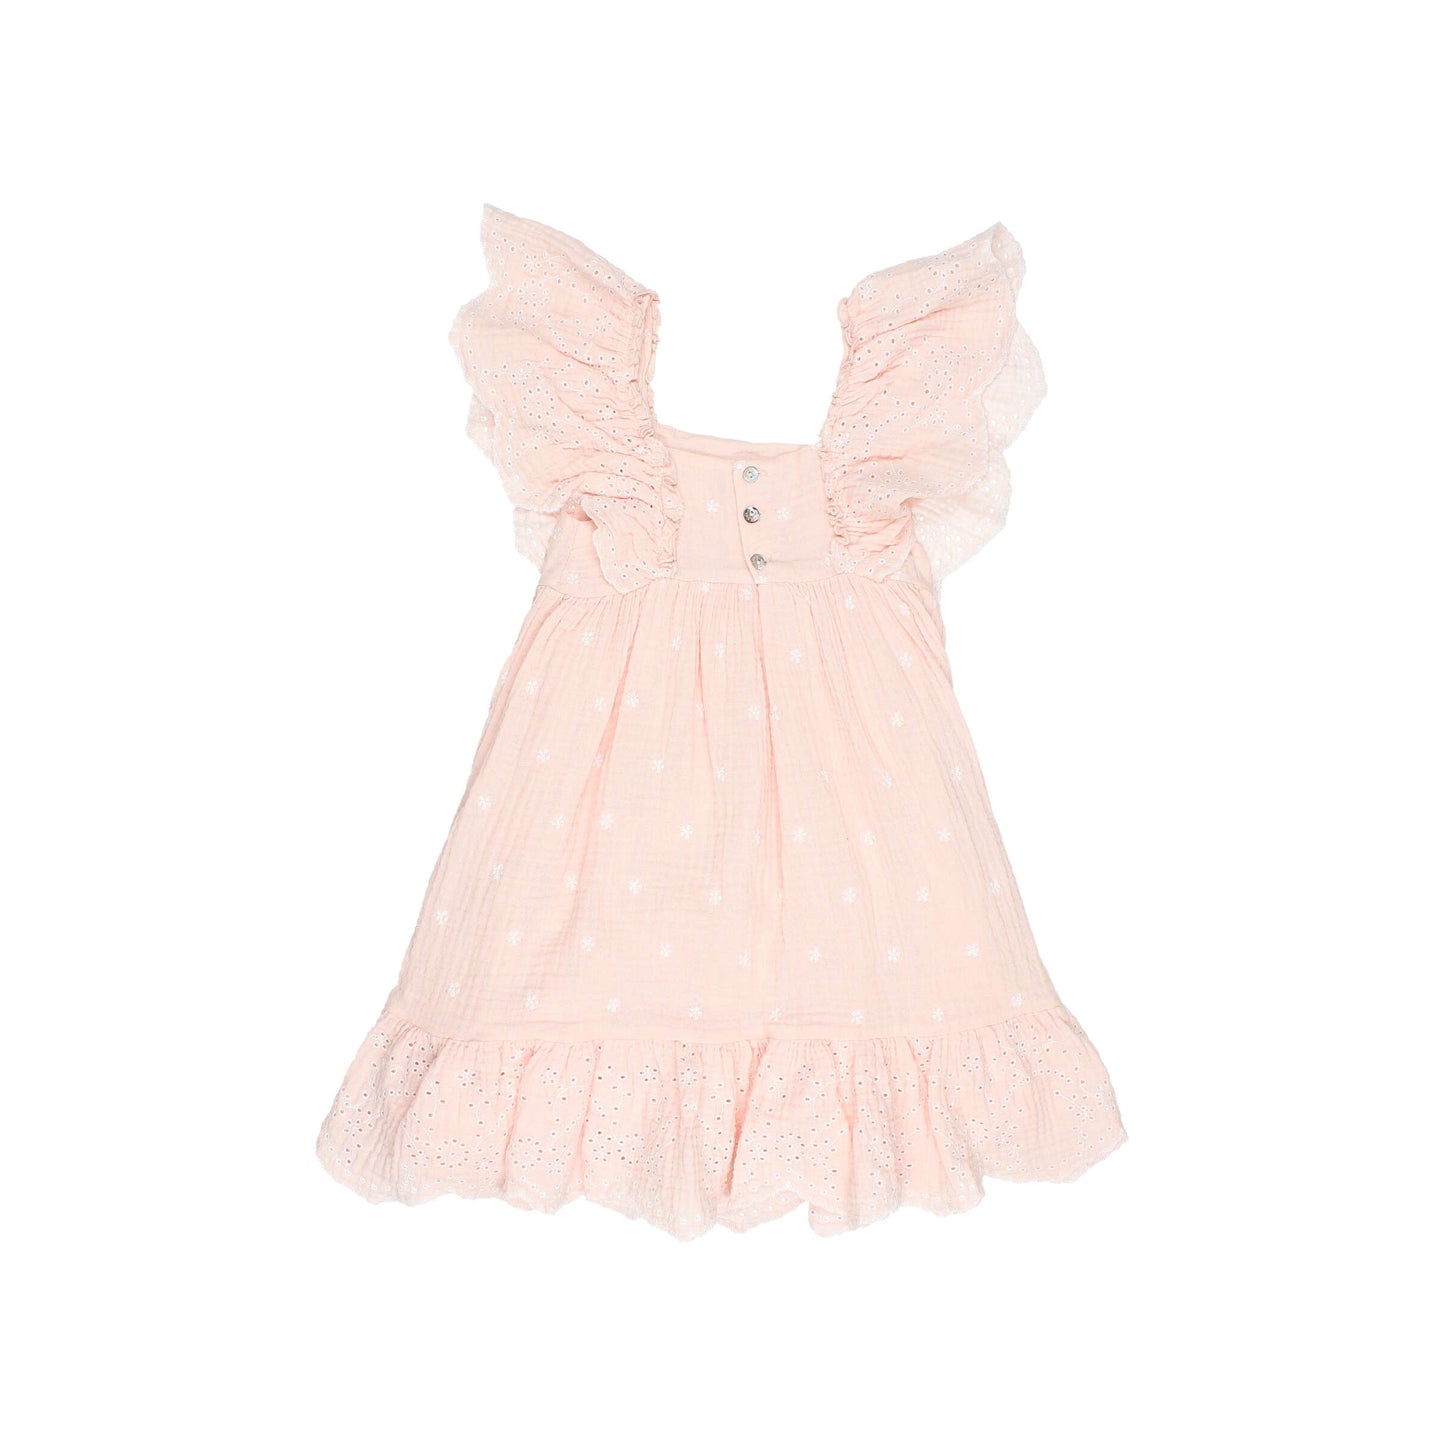 Embroidered Muslin Dress in Light Pink